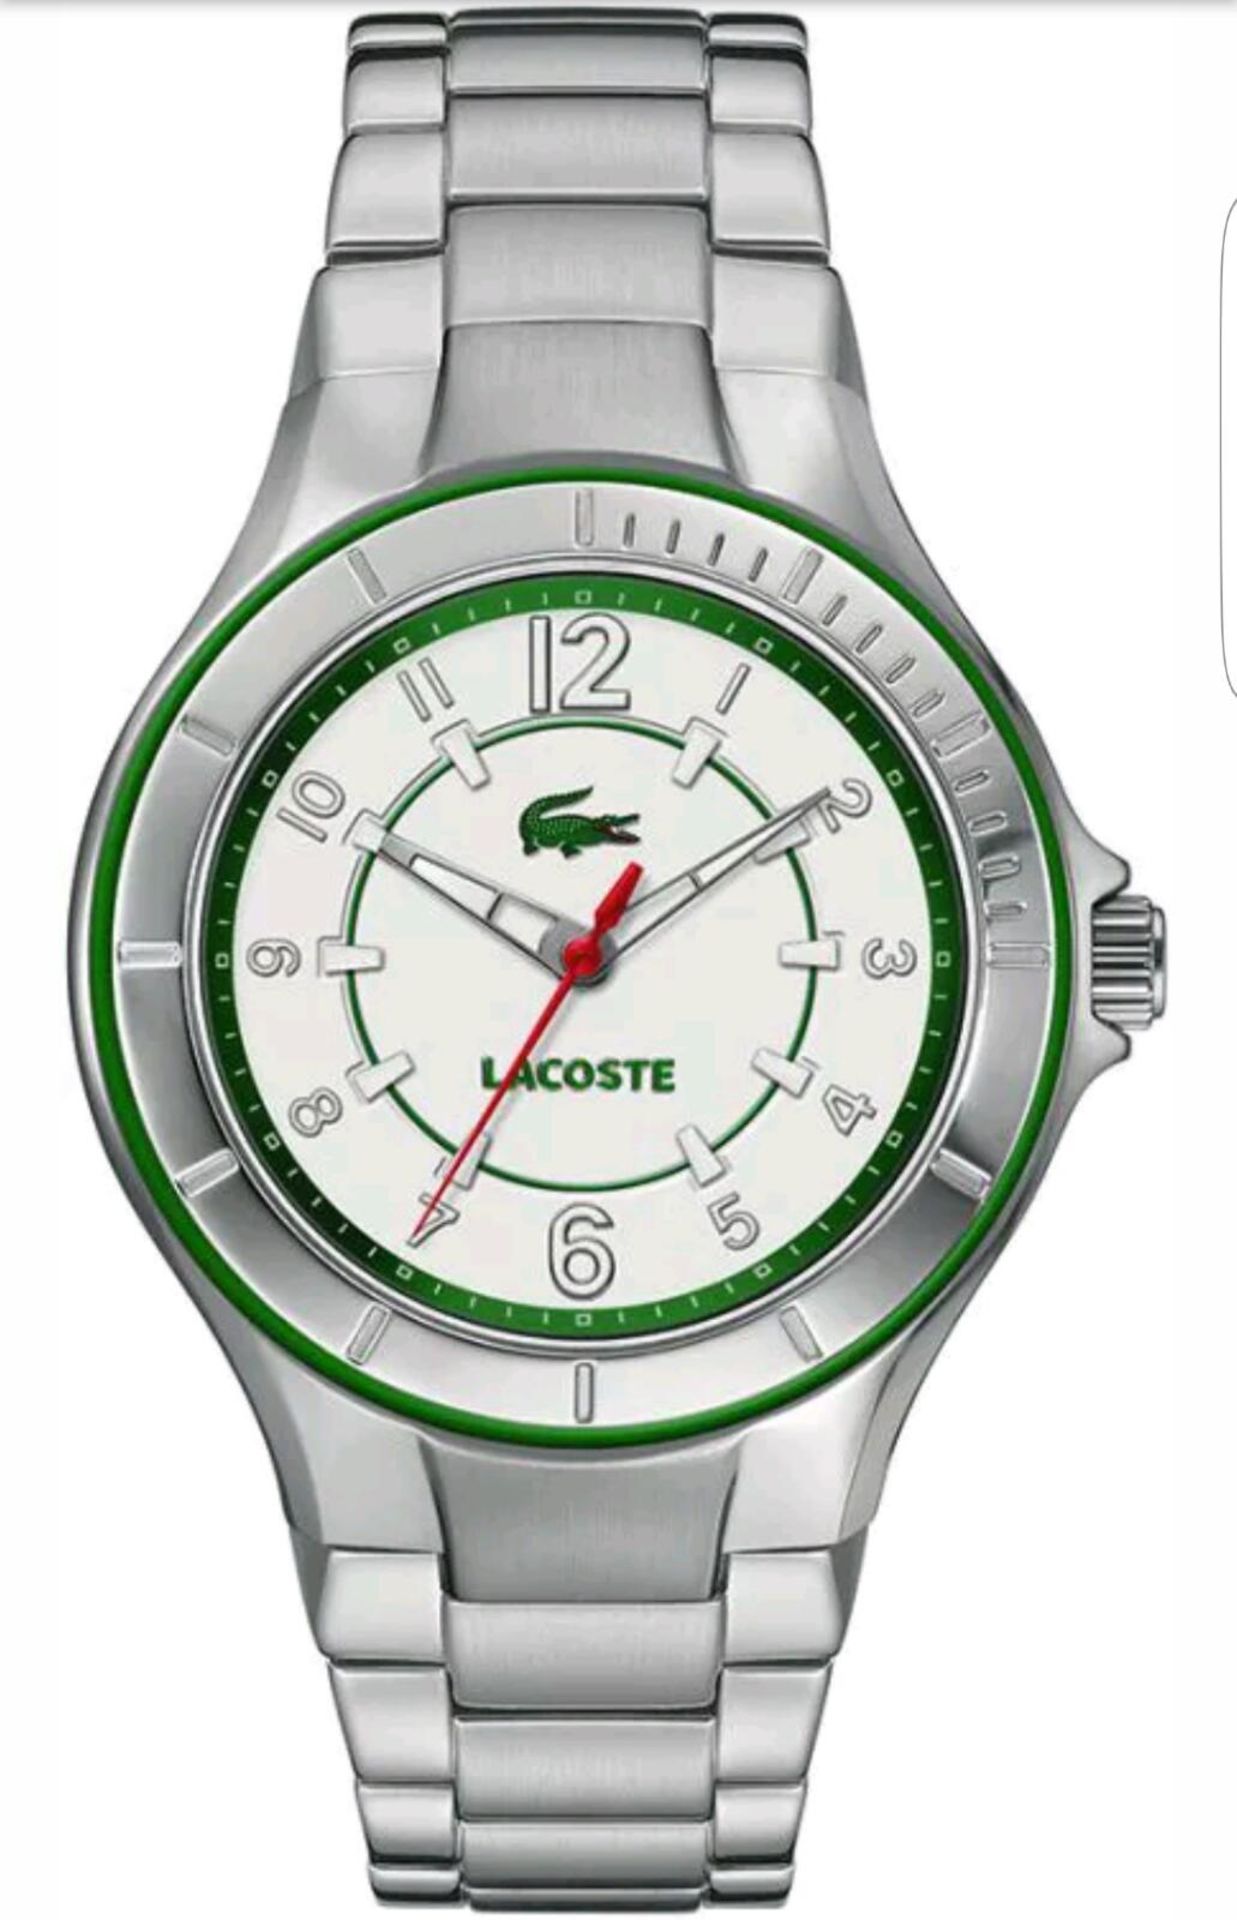 BRAND NEW LACOSTE LADIES ACAPULCO STAINLESS STEEL WATCH 2000814, COMPLETE WITH ORIGINAL BOX AND